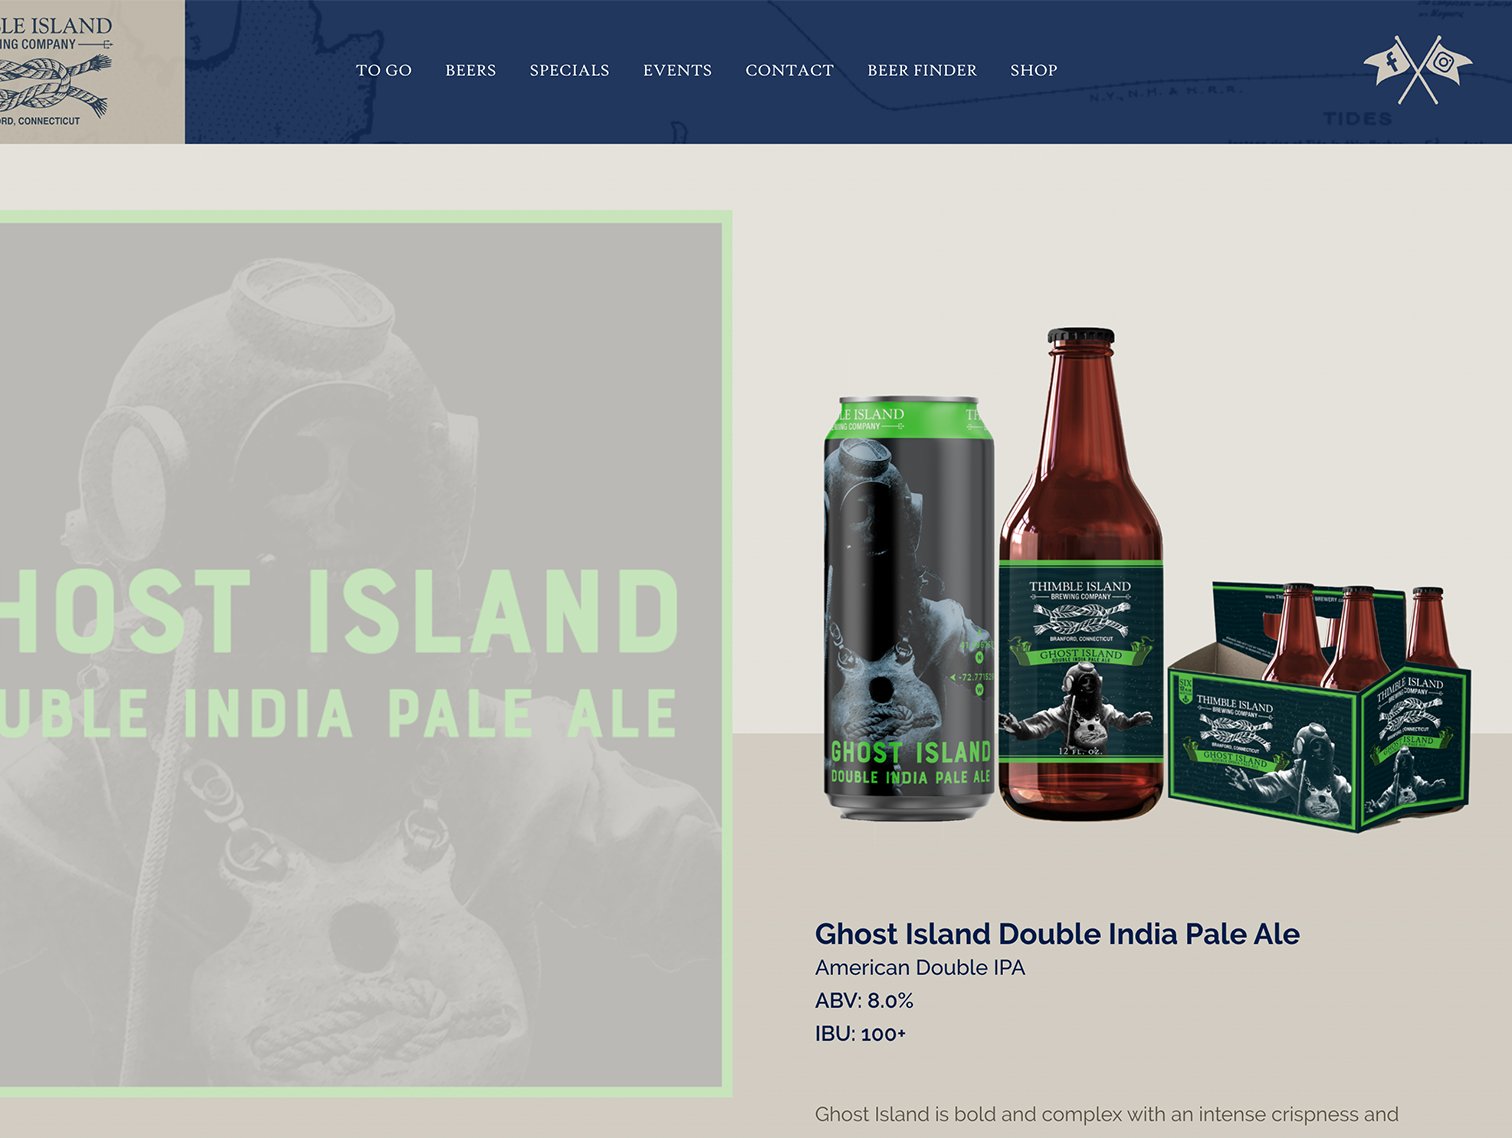 Ghost Island Double India Pale Ale